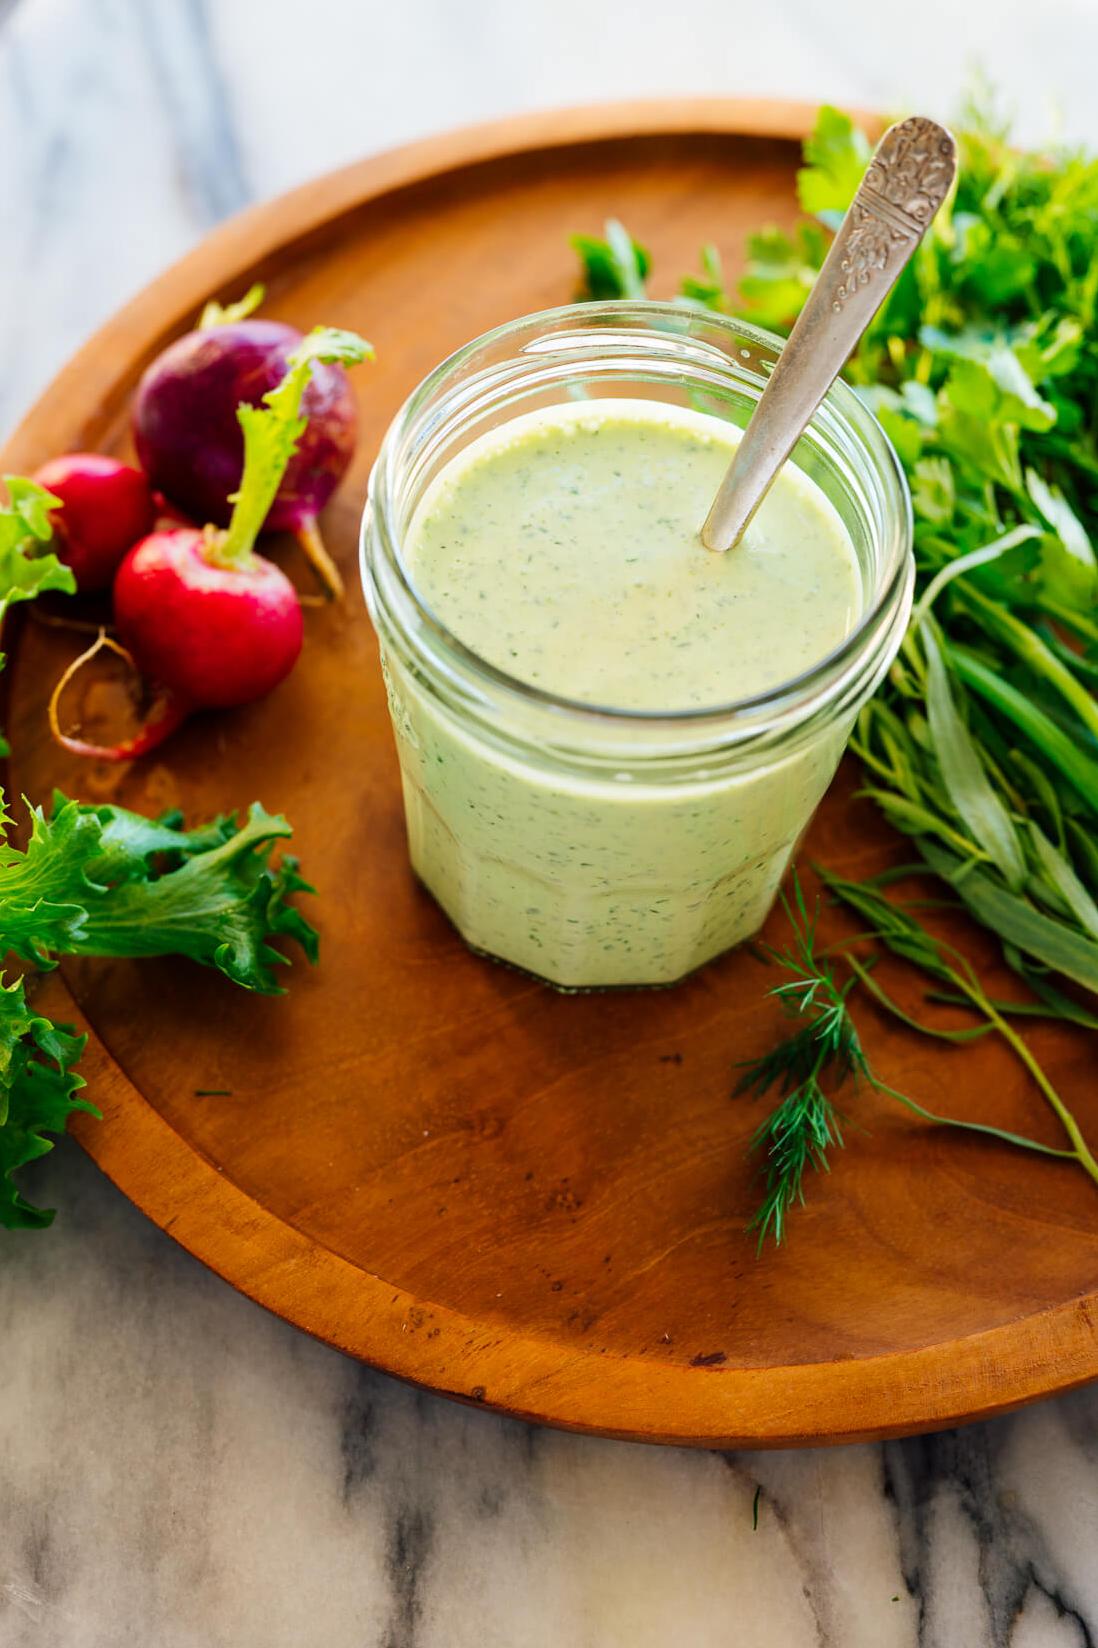  Trust me, this zesty dressing packed with fresh herbs will elevate your salad game!